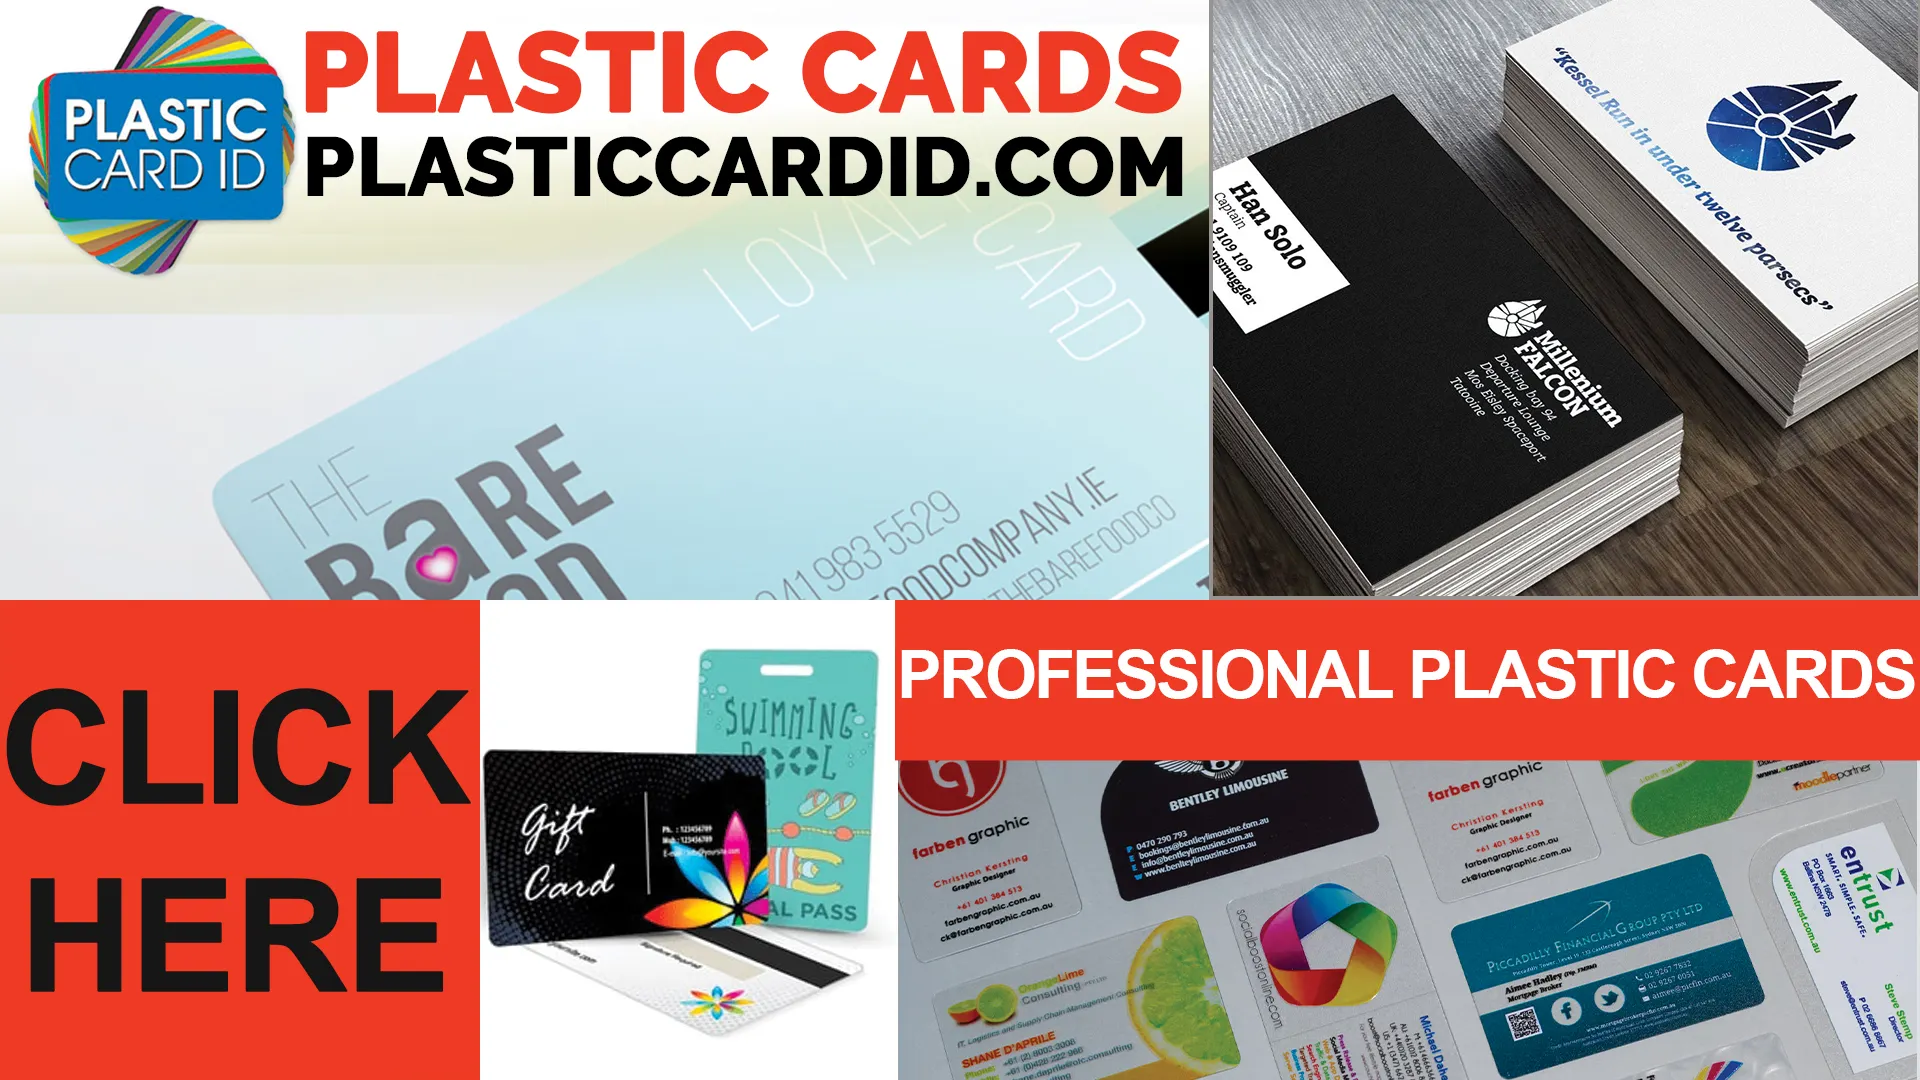 Catering to Diverse Business Needs with a Wide Range of Plastic Cards